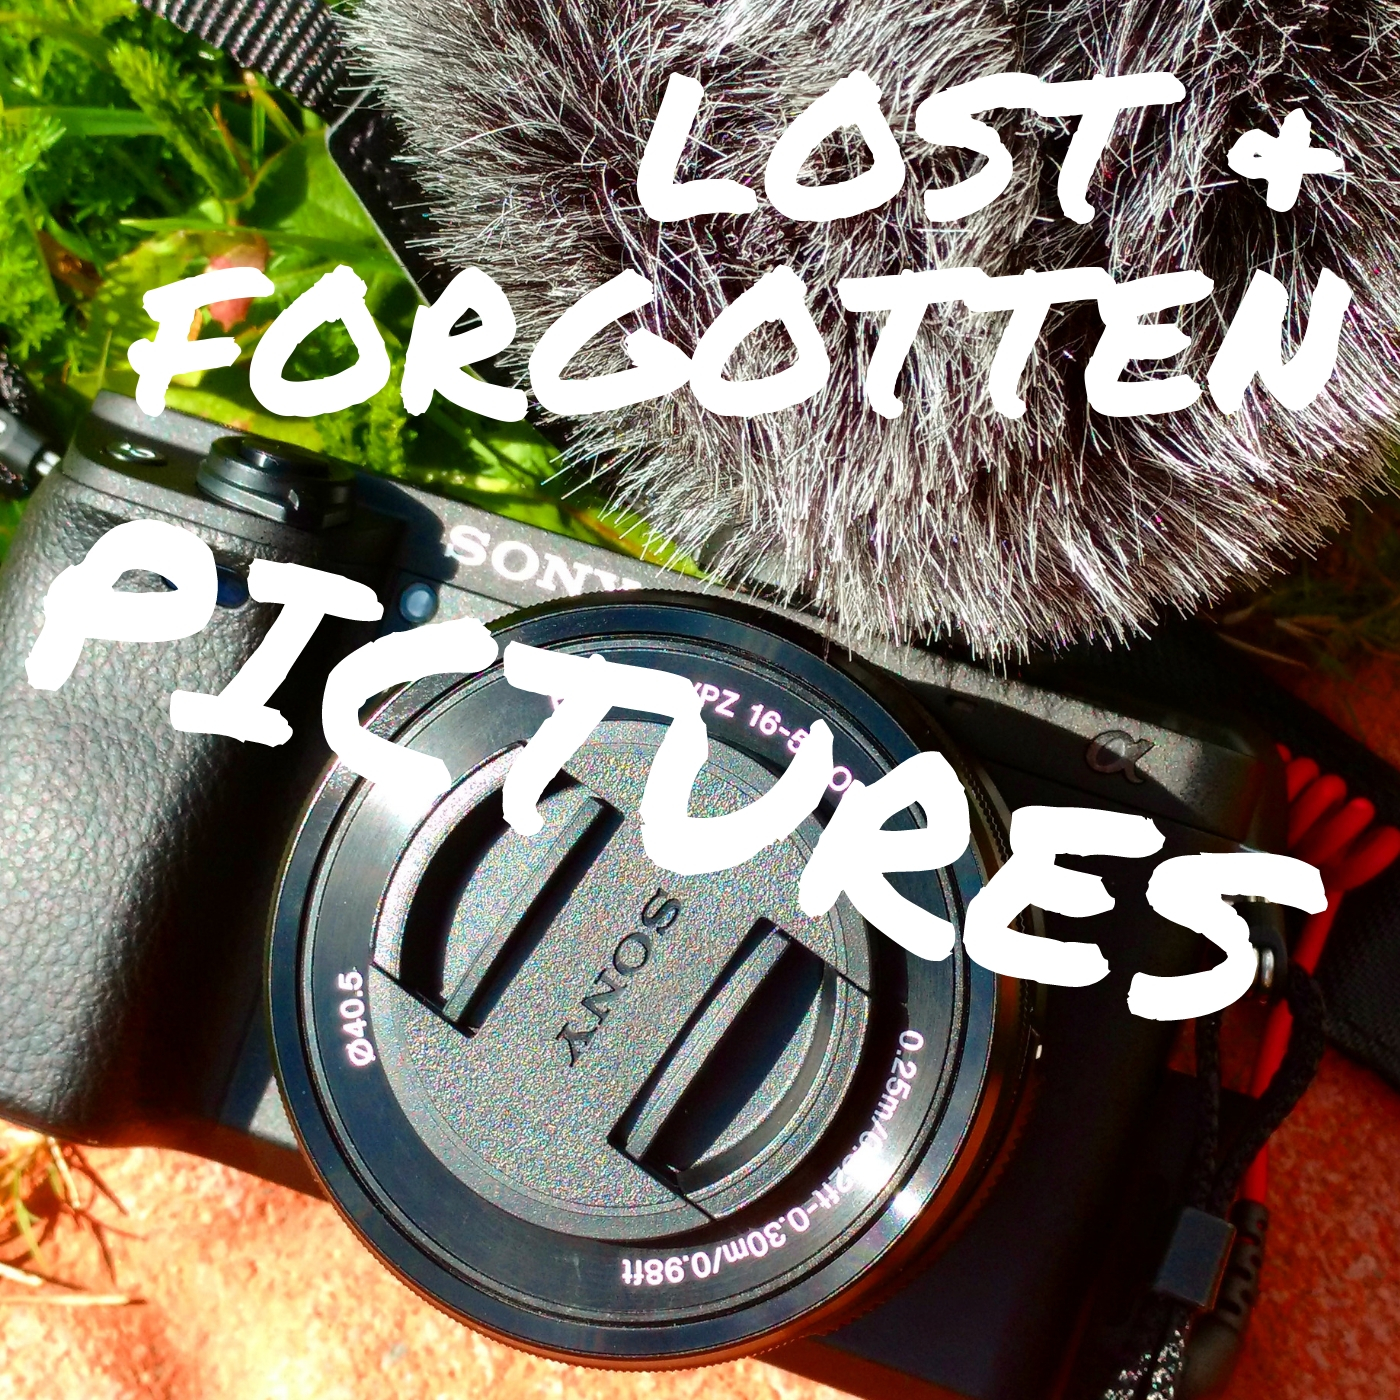 Lost and forgotten Pictures, Wildly Intrepid